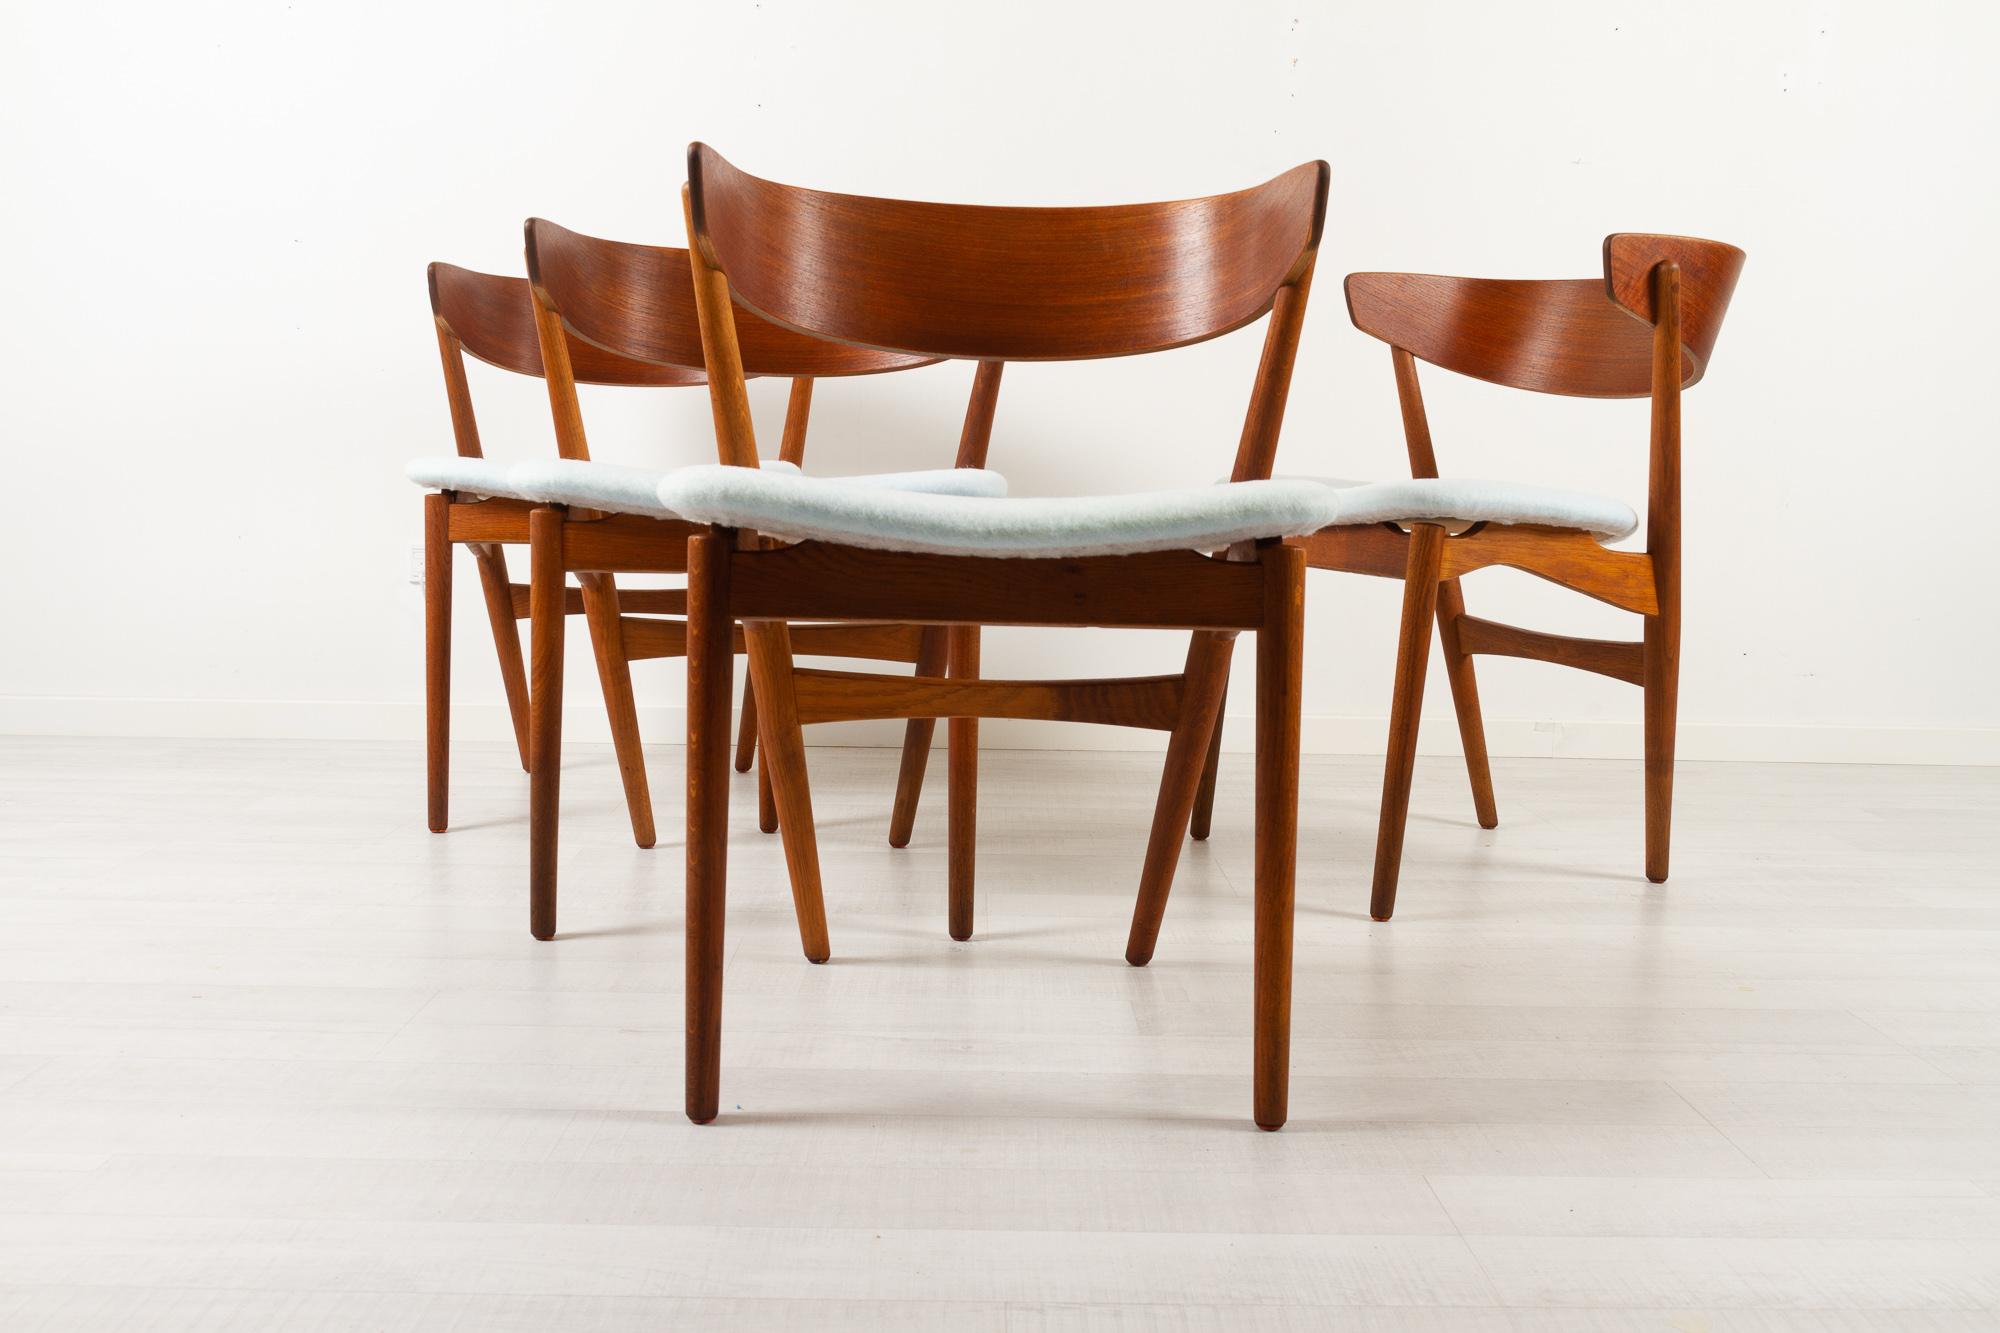 Vintage Danish Teak Dining Chairs No. 7 by Helge Sibast 1960s Set of 4 In Good Condition For Sale In Asaa, DK